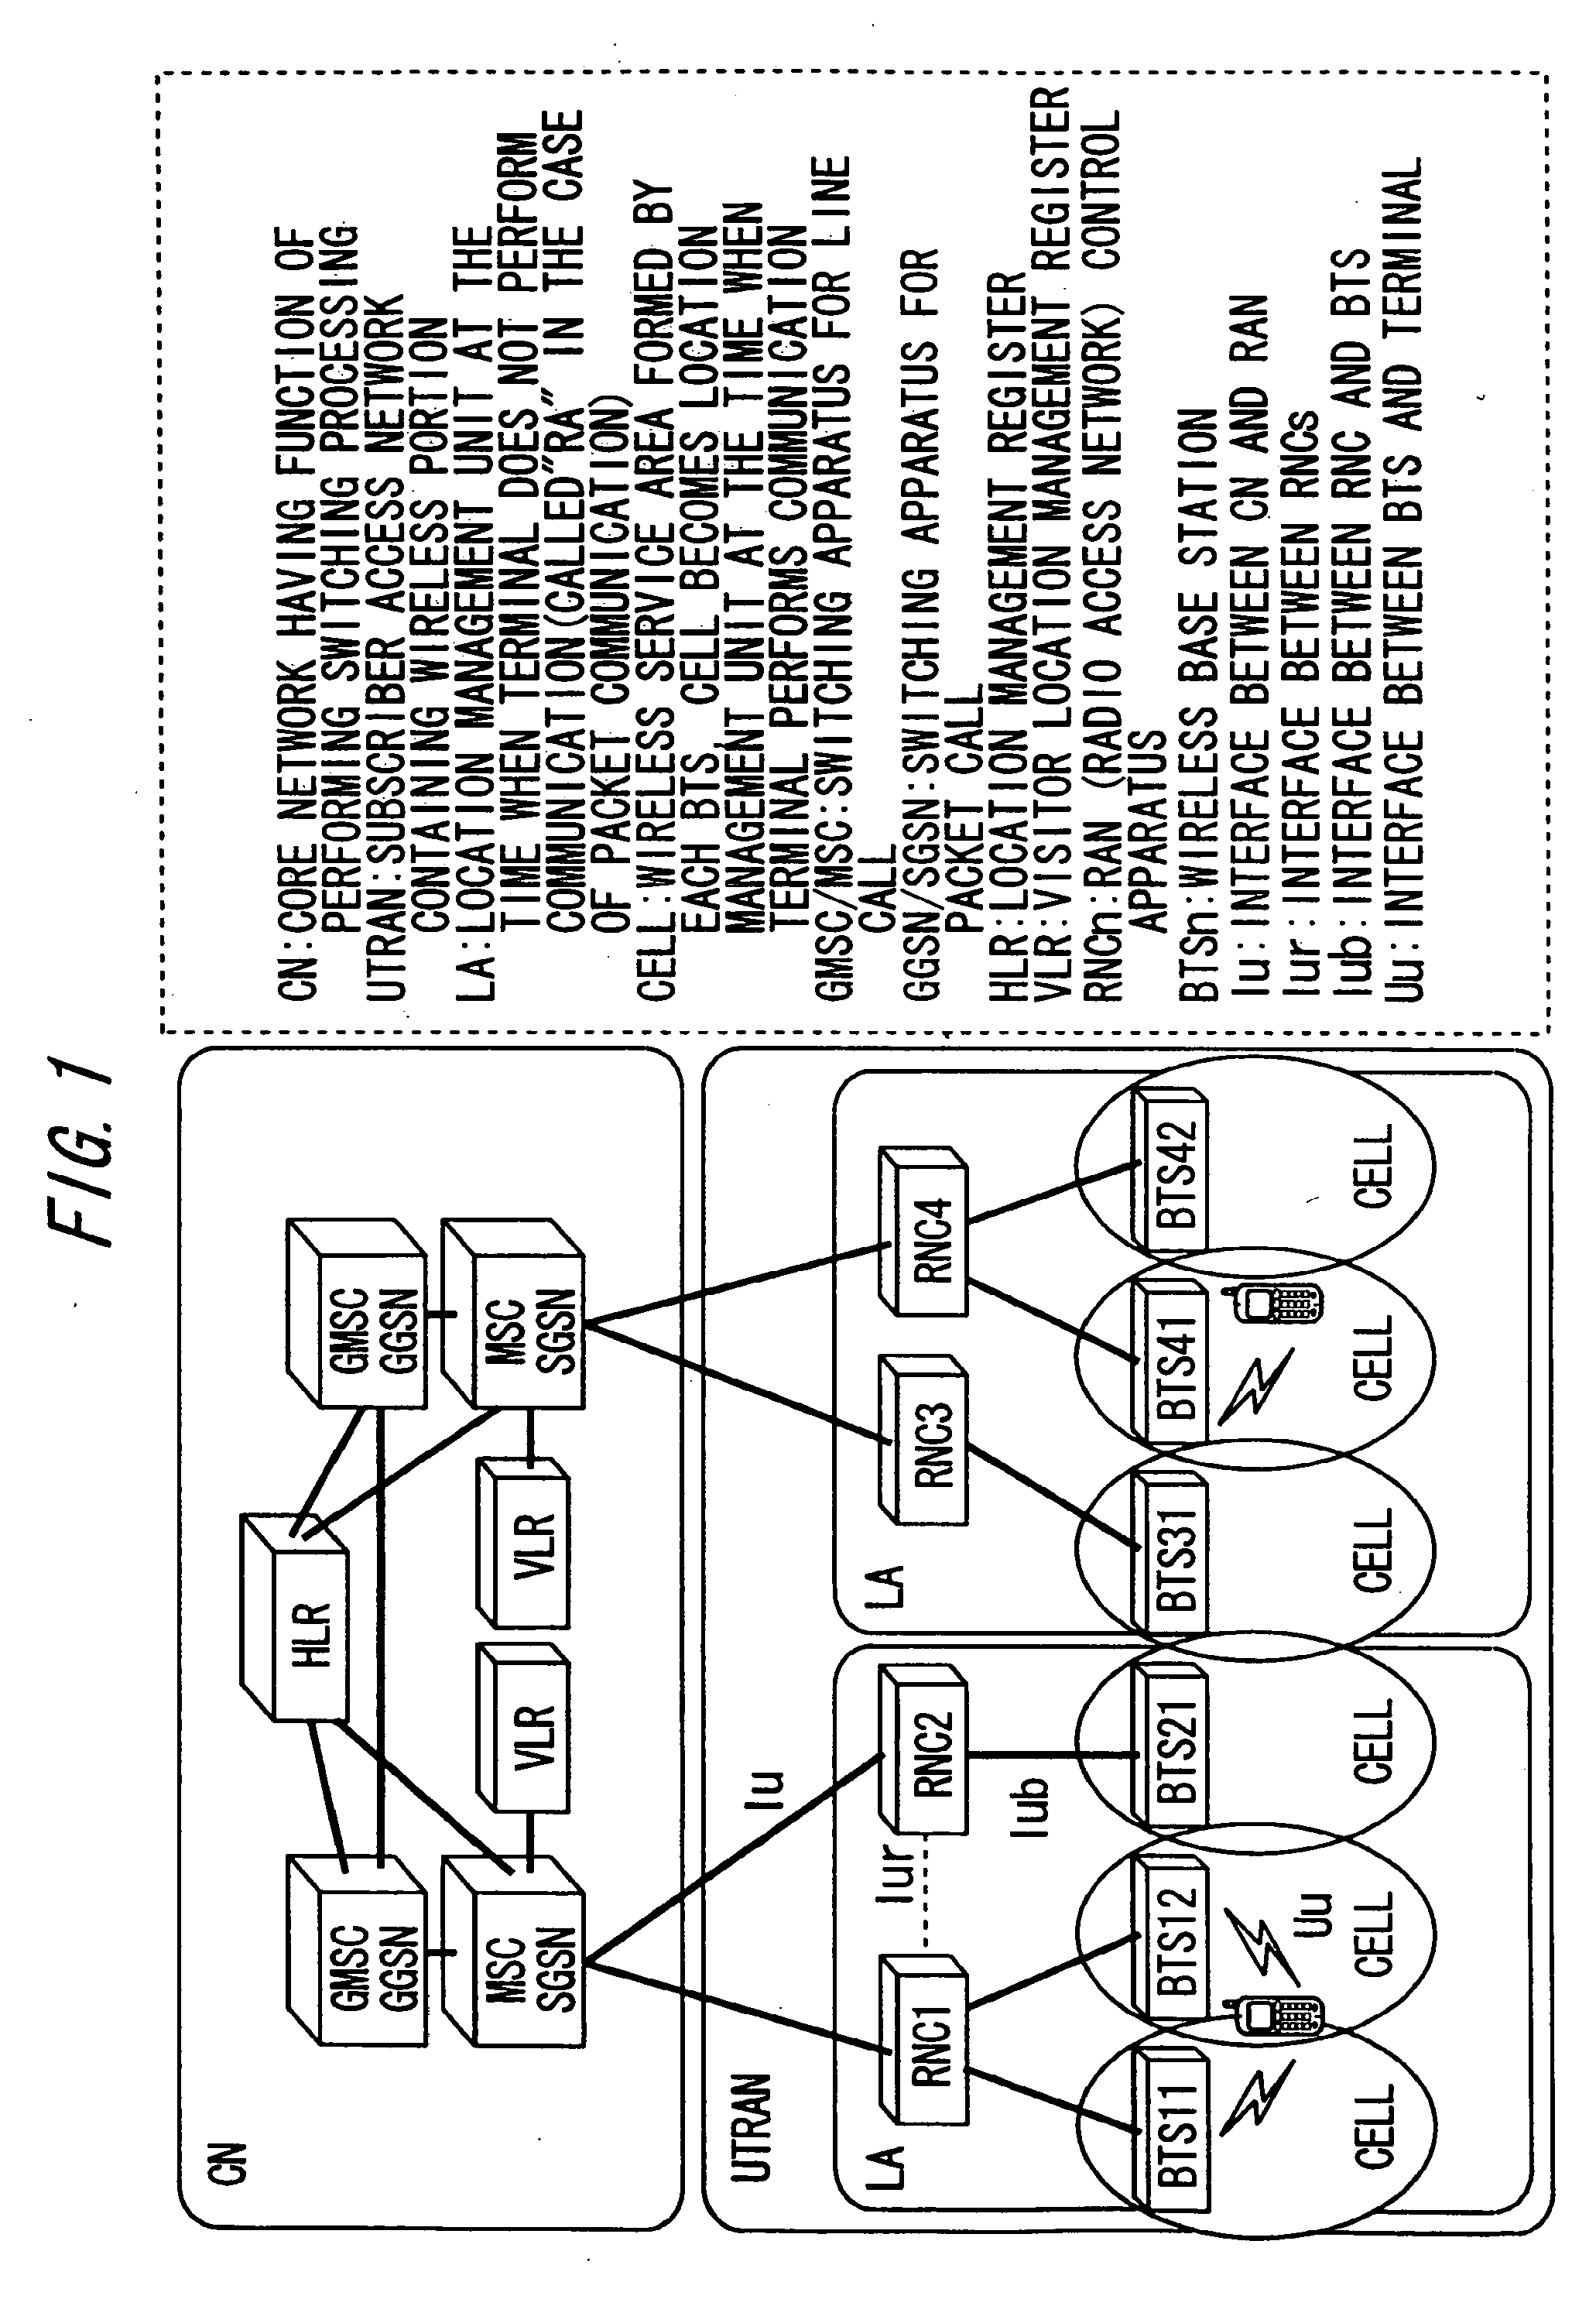 Terminal state control system